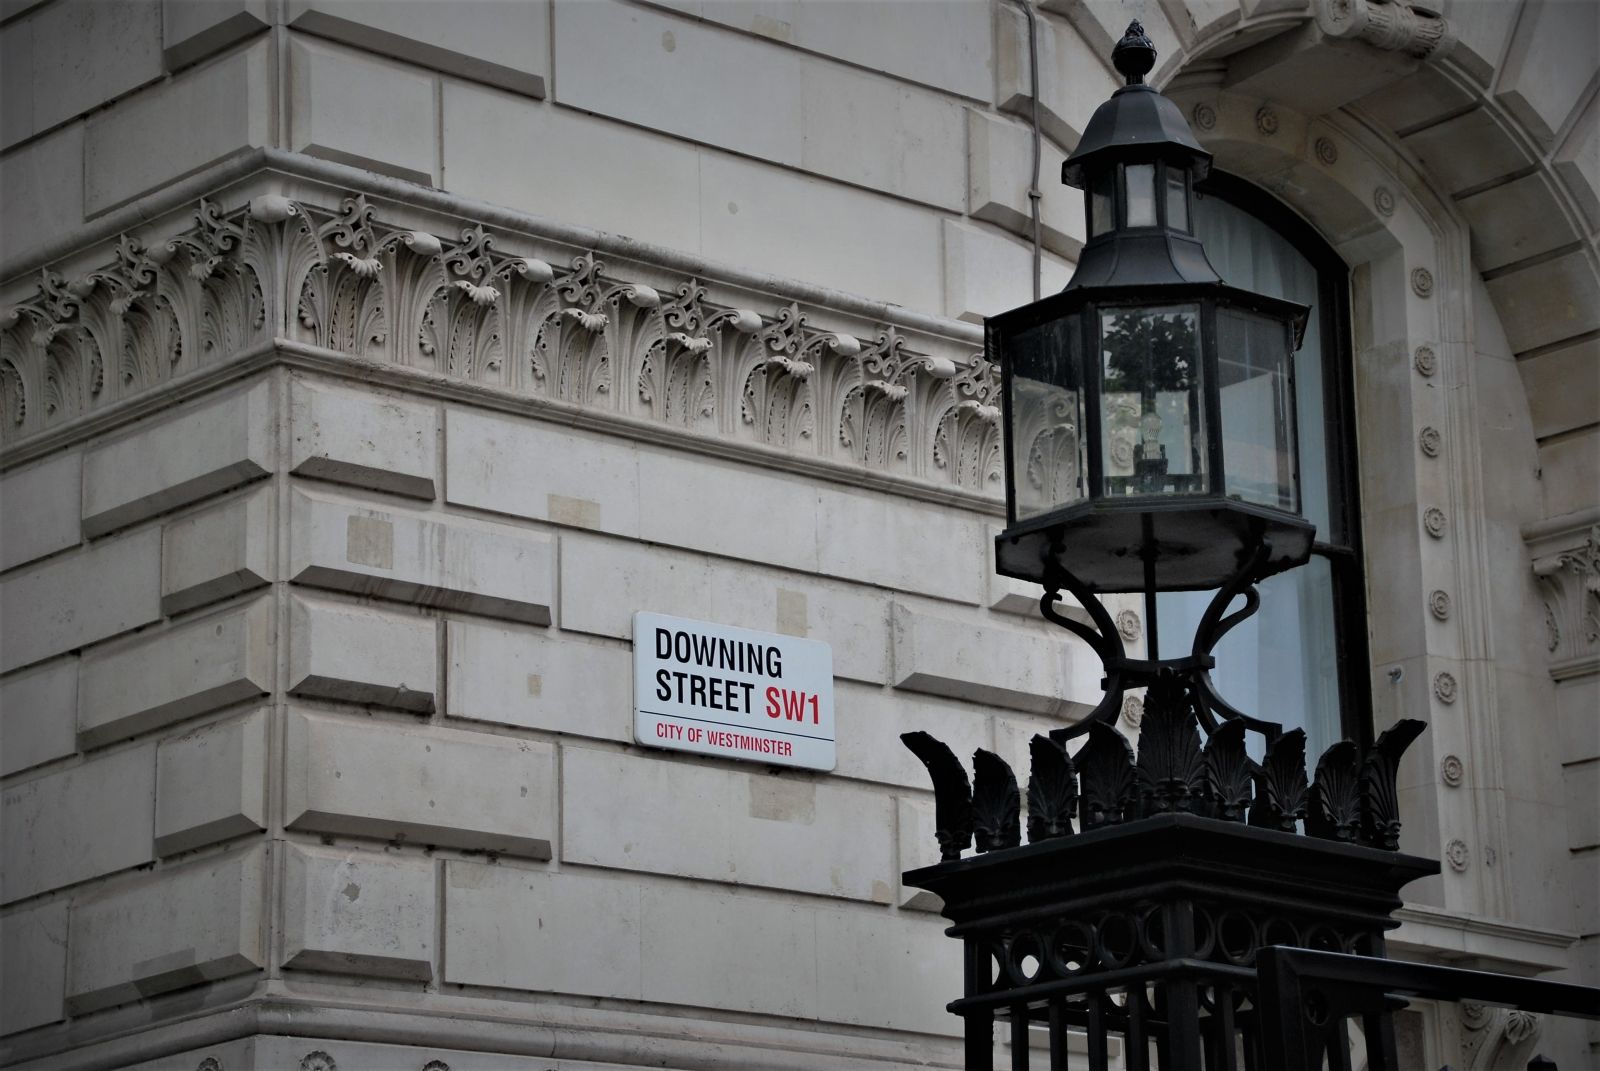 Street sign of Downing Street 